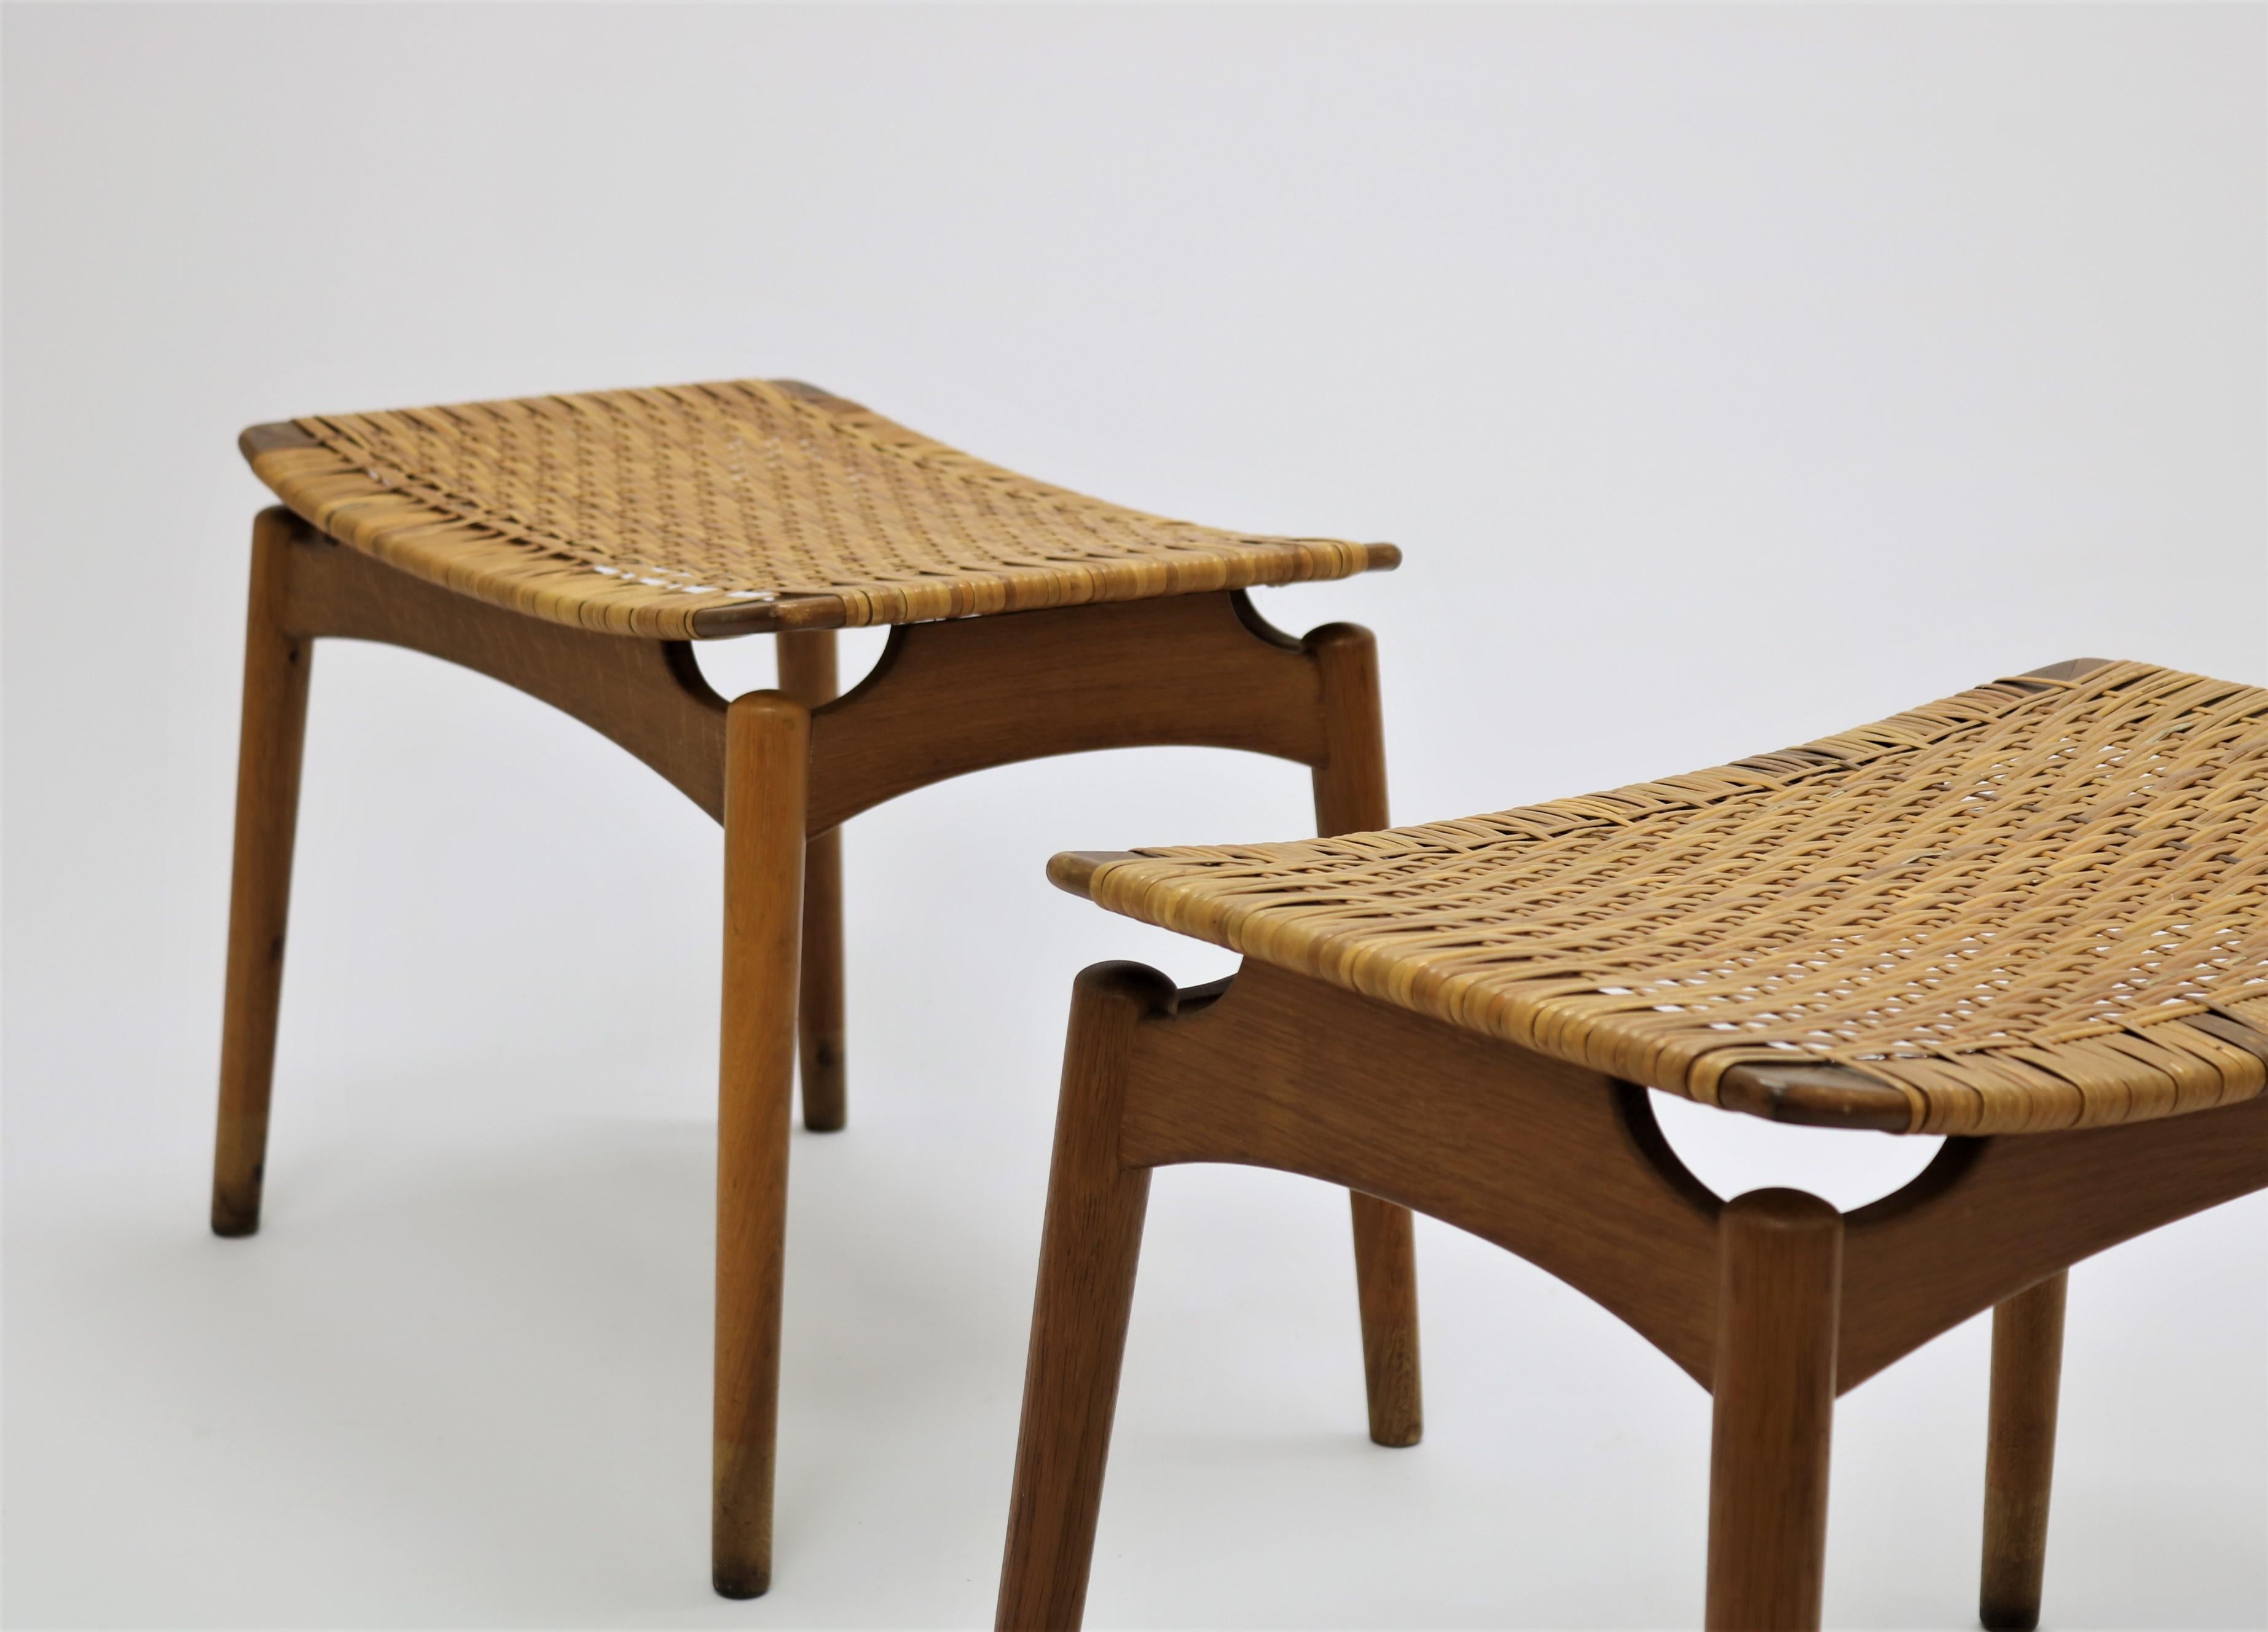 Danish Pair of Scandinavian Modern Stools in Oak and Cane by Olholm Denmark, 1950s